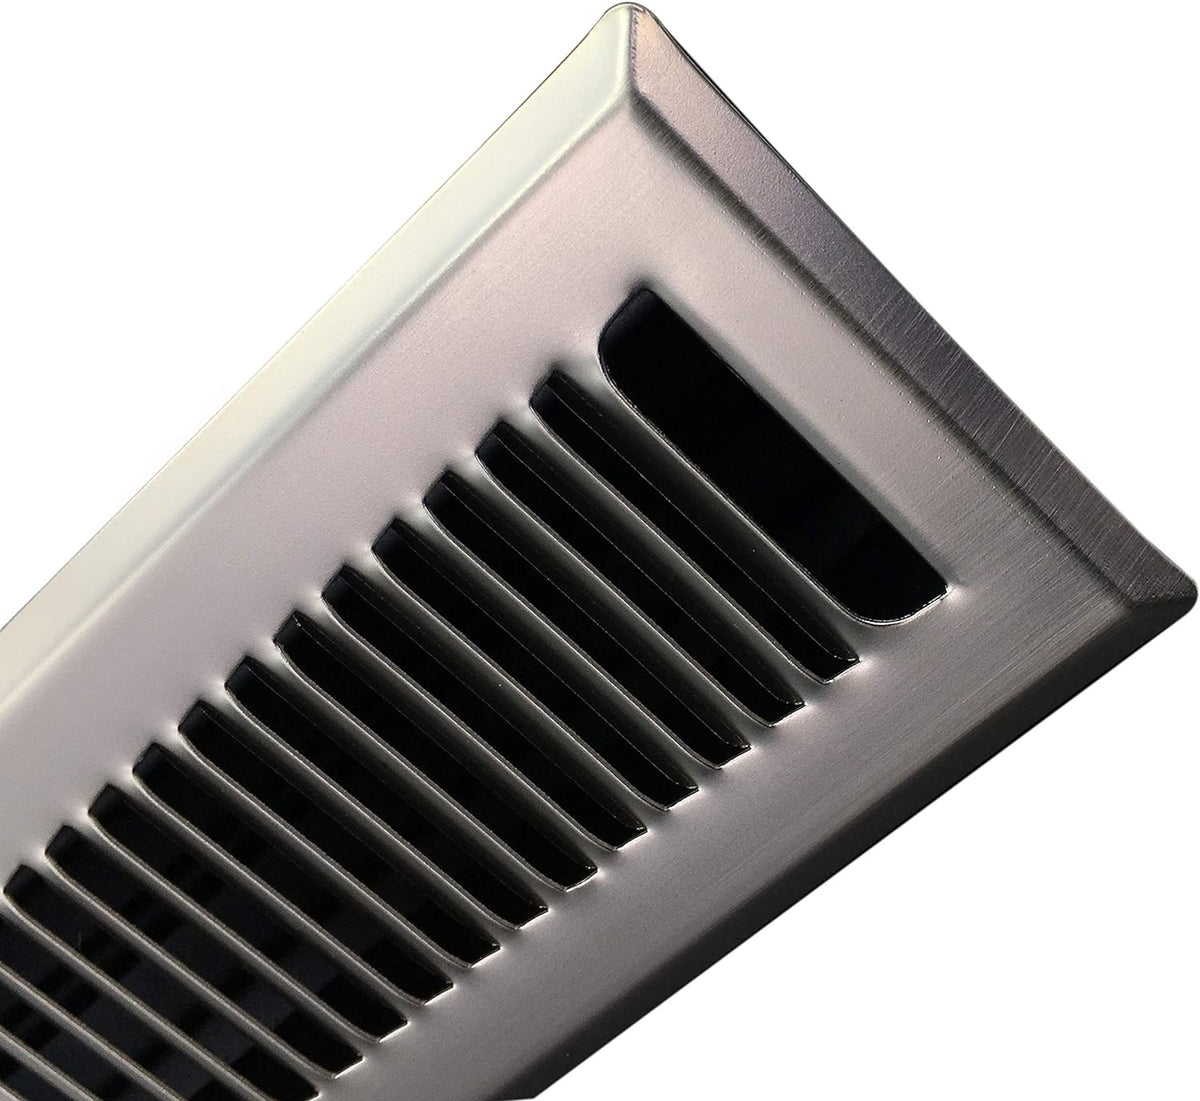 4&quot; X 14 Modern Floor Register Grille with Dampers - Contempo Slotted Grate - HVAC Vent Duct Cover - Chrome